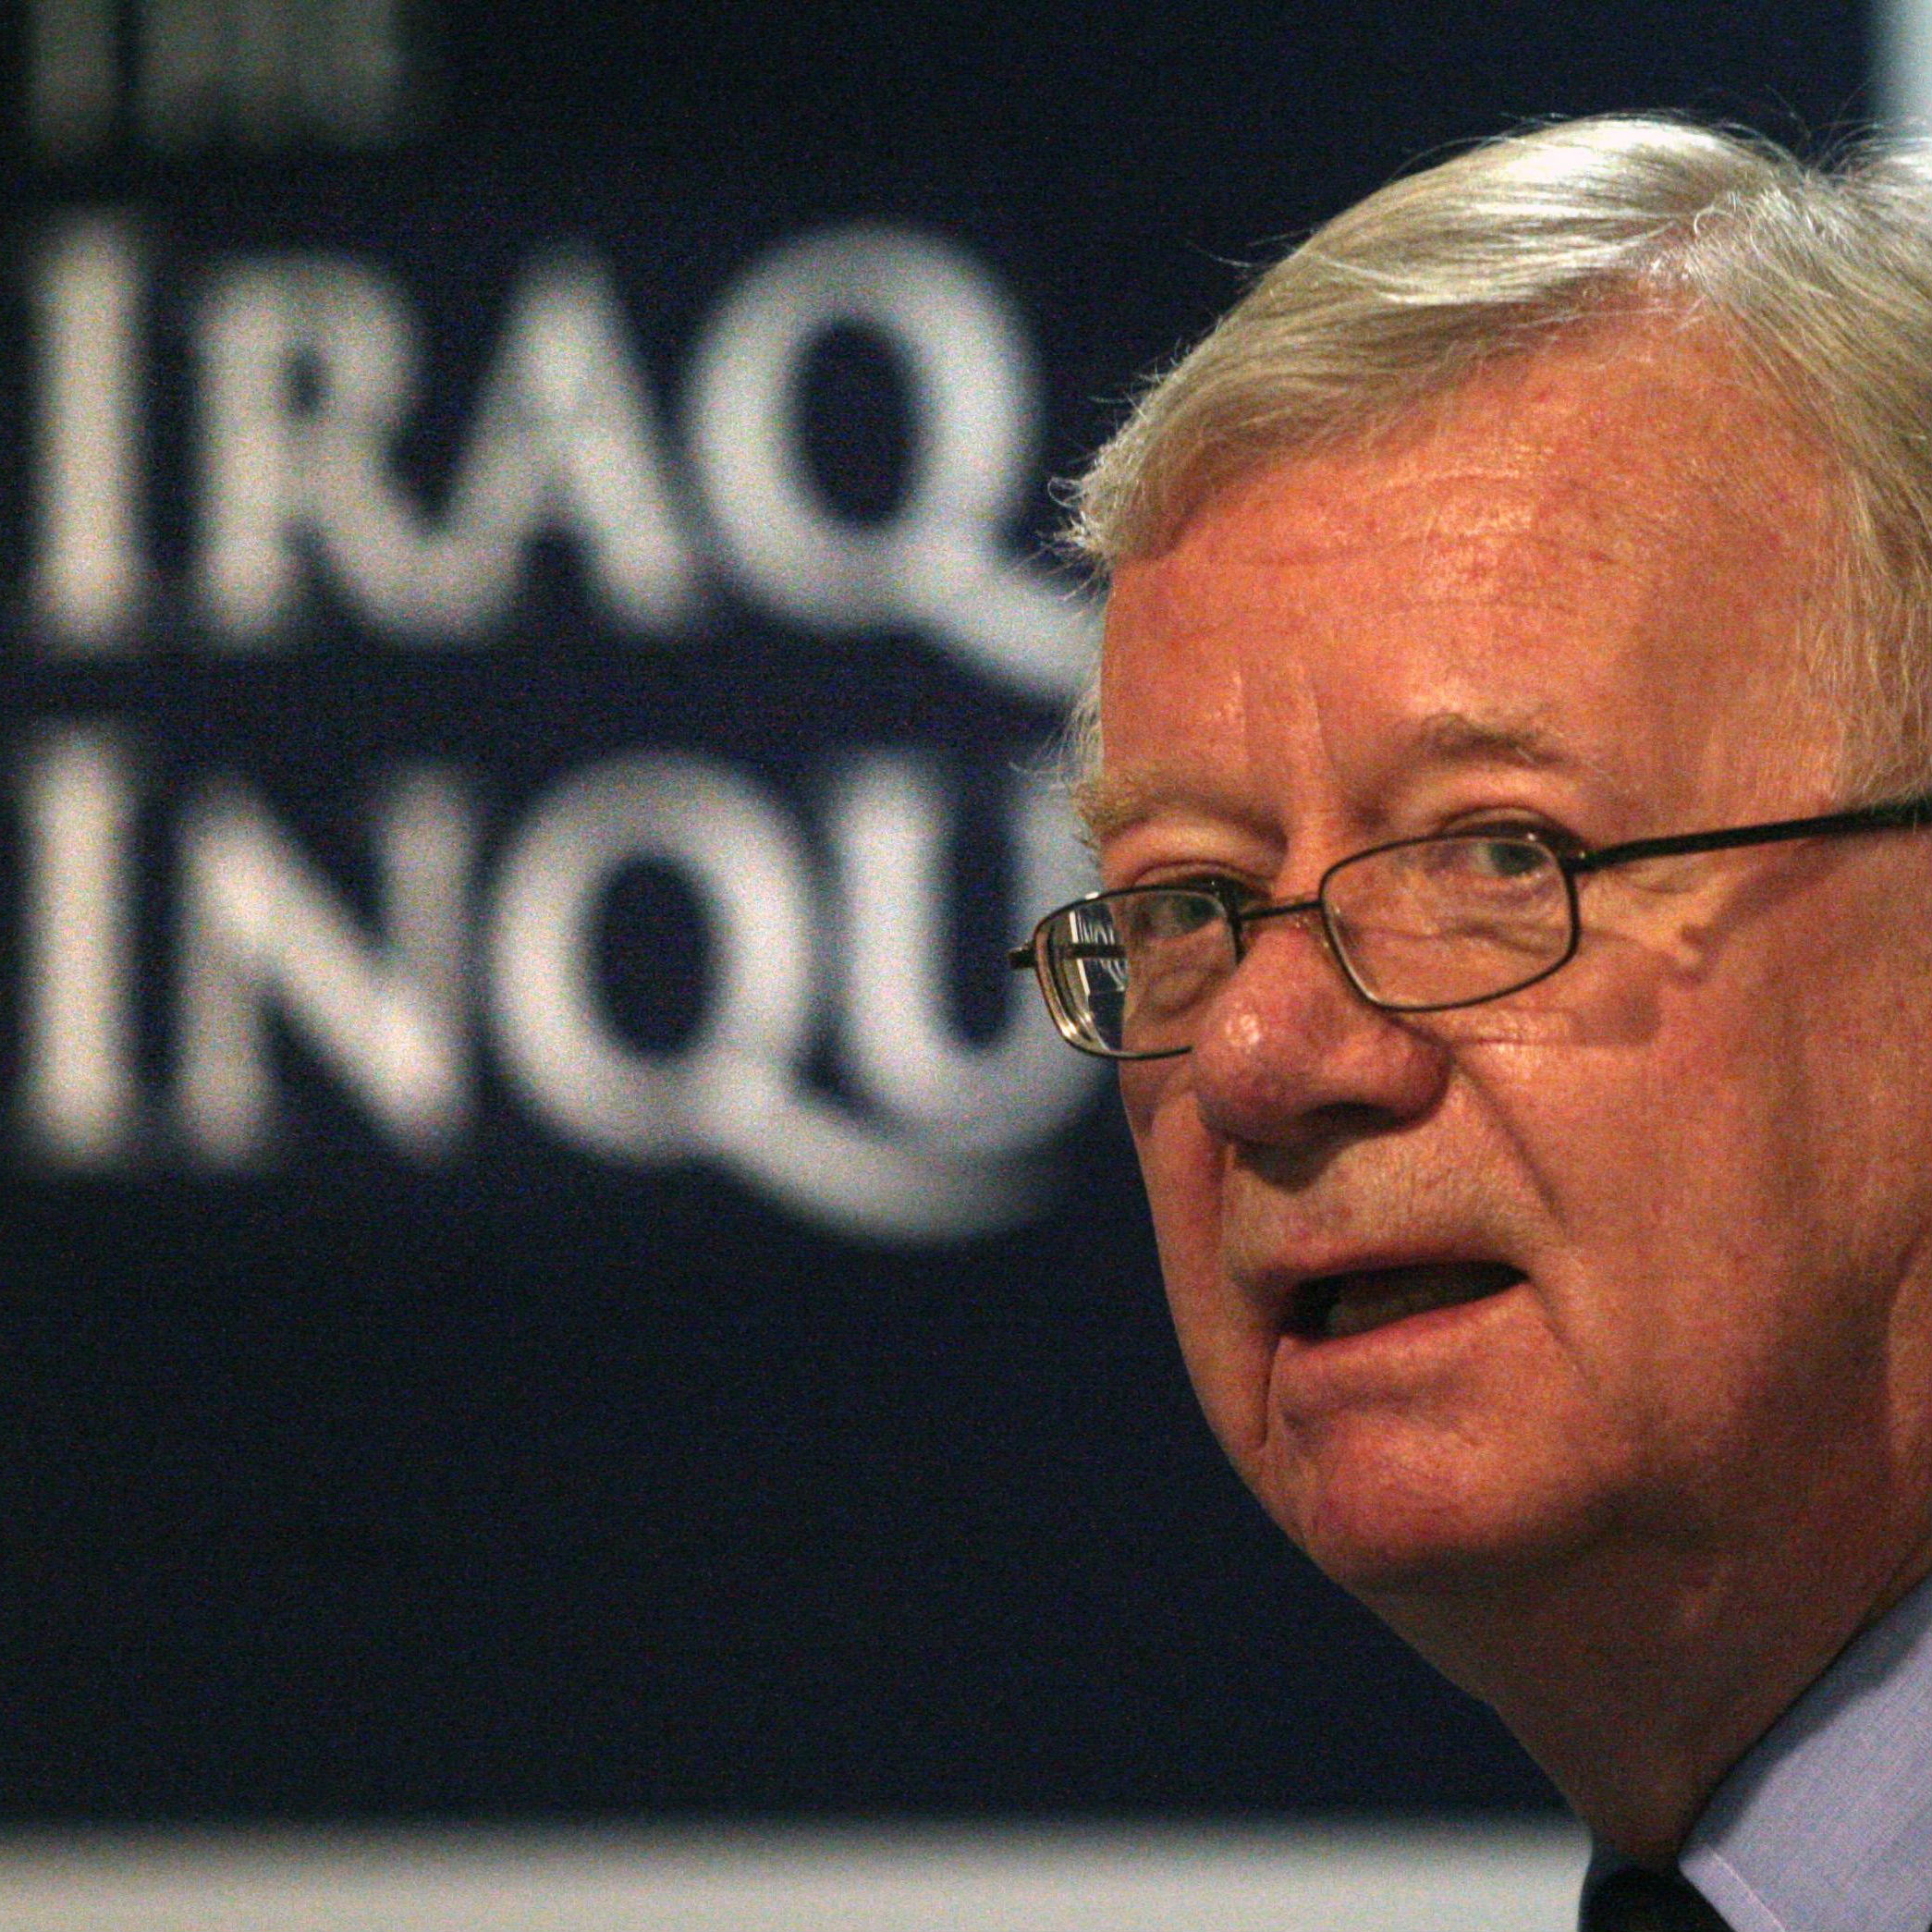 Chilcot's final verdict on Britain's role in the Iraq conflict is both damning and shaming